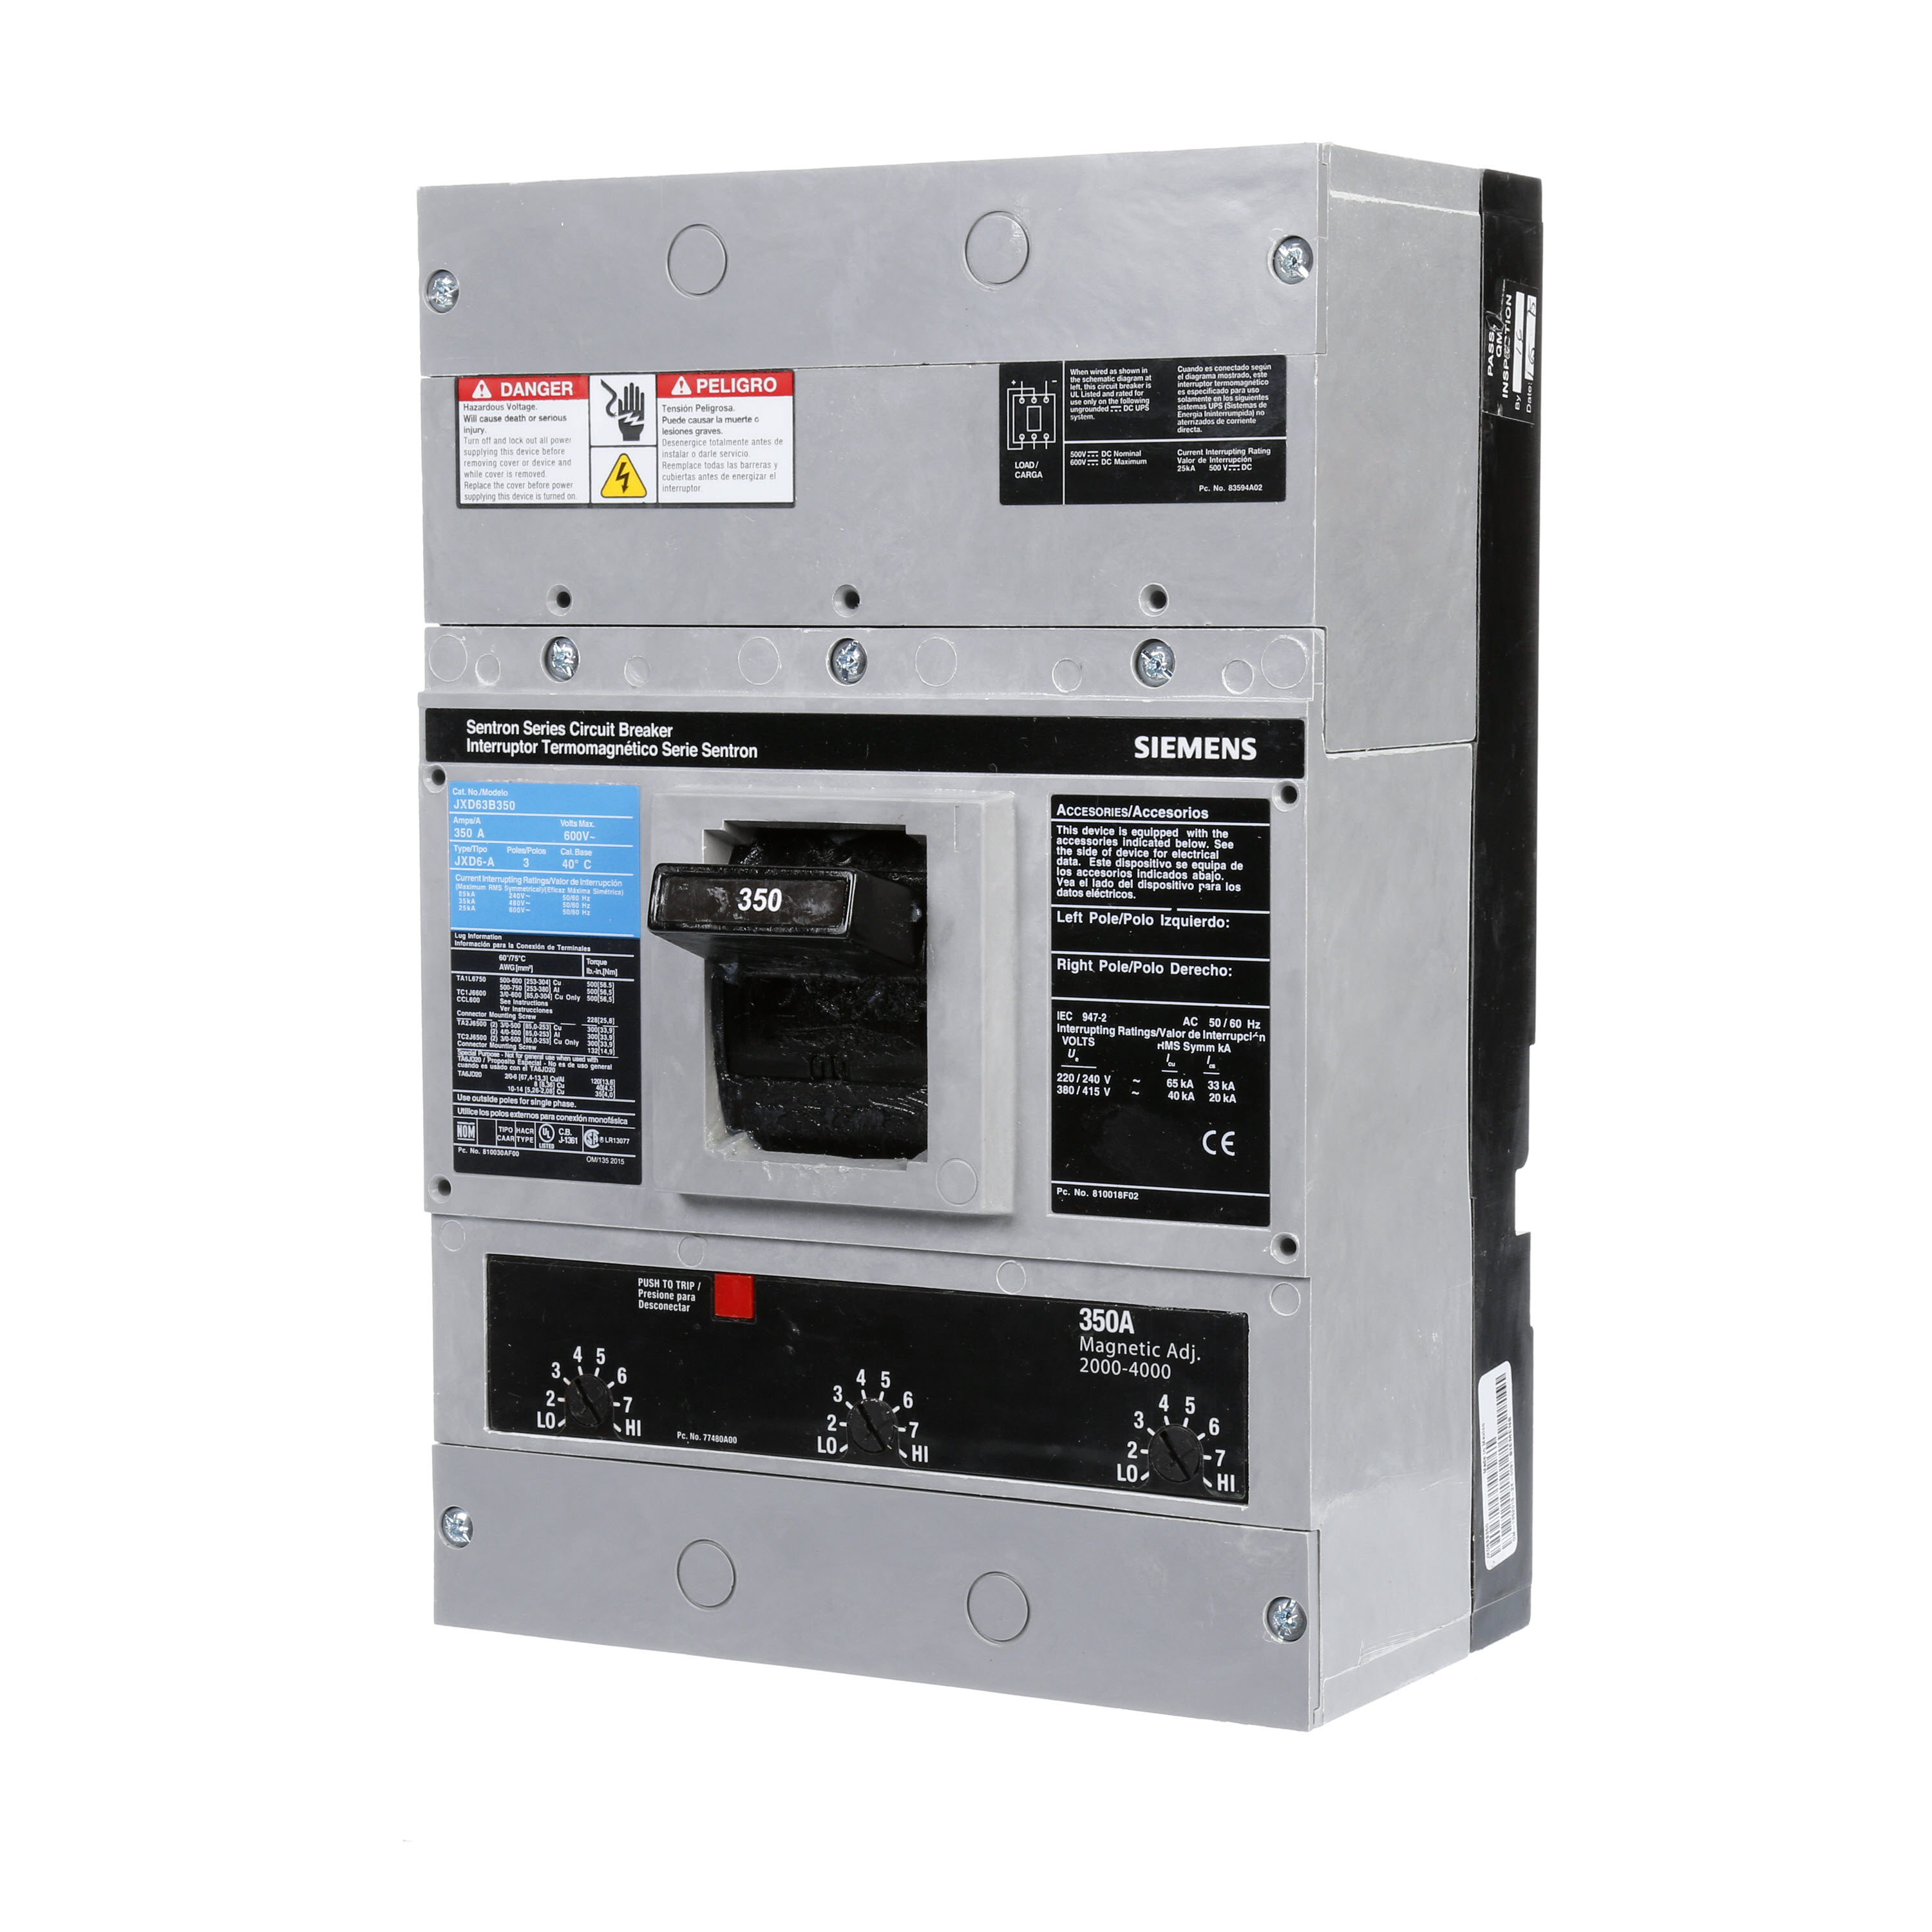 SIEMENS LOW VOLTAGE SENTRON MOLDED CASE CIRCUIT BREAKER WITH THERMAL - MAGNETICTRIP UNIT. ASSEMBLED STANDARD 40 DEG C BREAKER JD FRAME WITH STANDARD BREAKING CAPACITY. 350A 3-POLE (25KAIC AT 600V) (35KAIC AT 480V). NON-INTERCHANGEABLE TRIP UNIT. SPECIAL FEATURES NO LUGS INSTALLED. DIMENSIONS (W x H x D) IN 7.50 x 11.0 x 4.00.